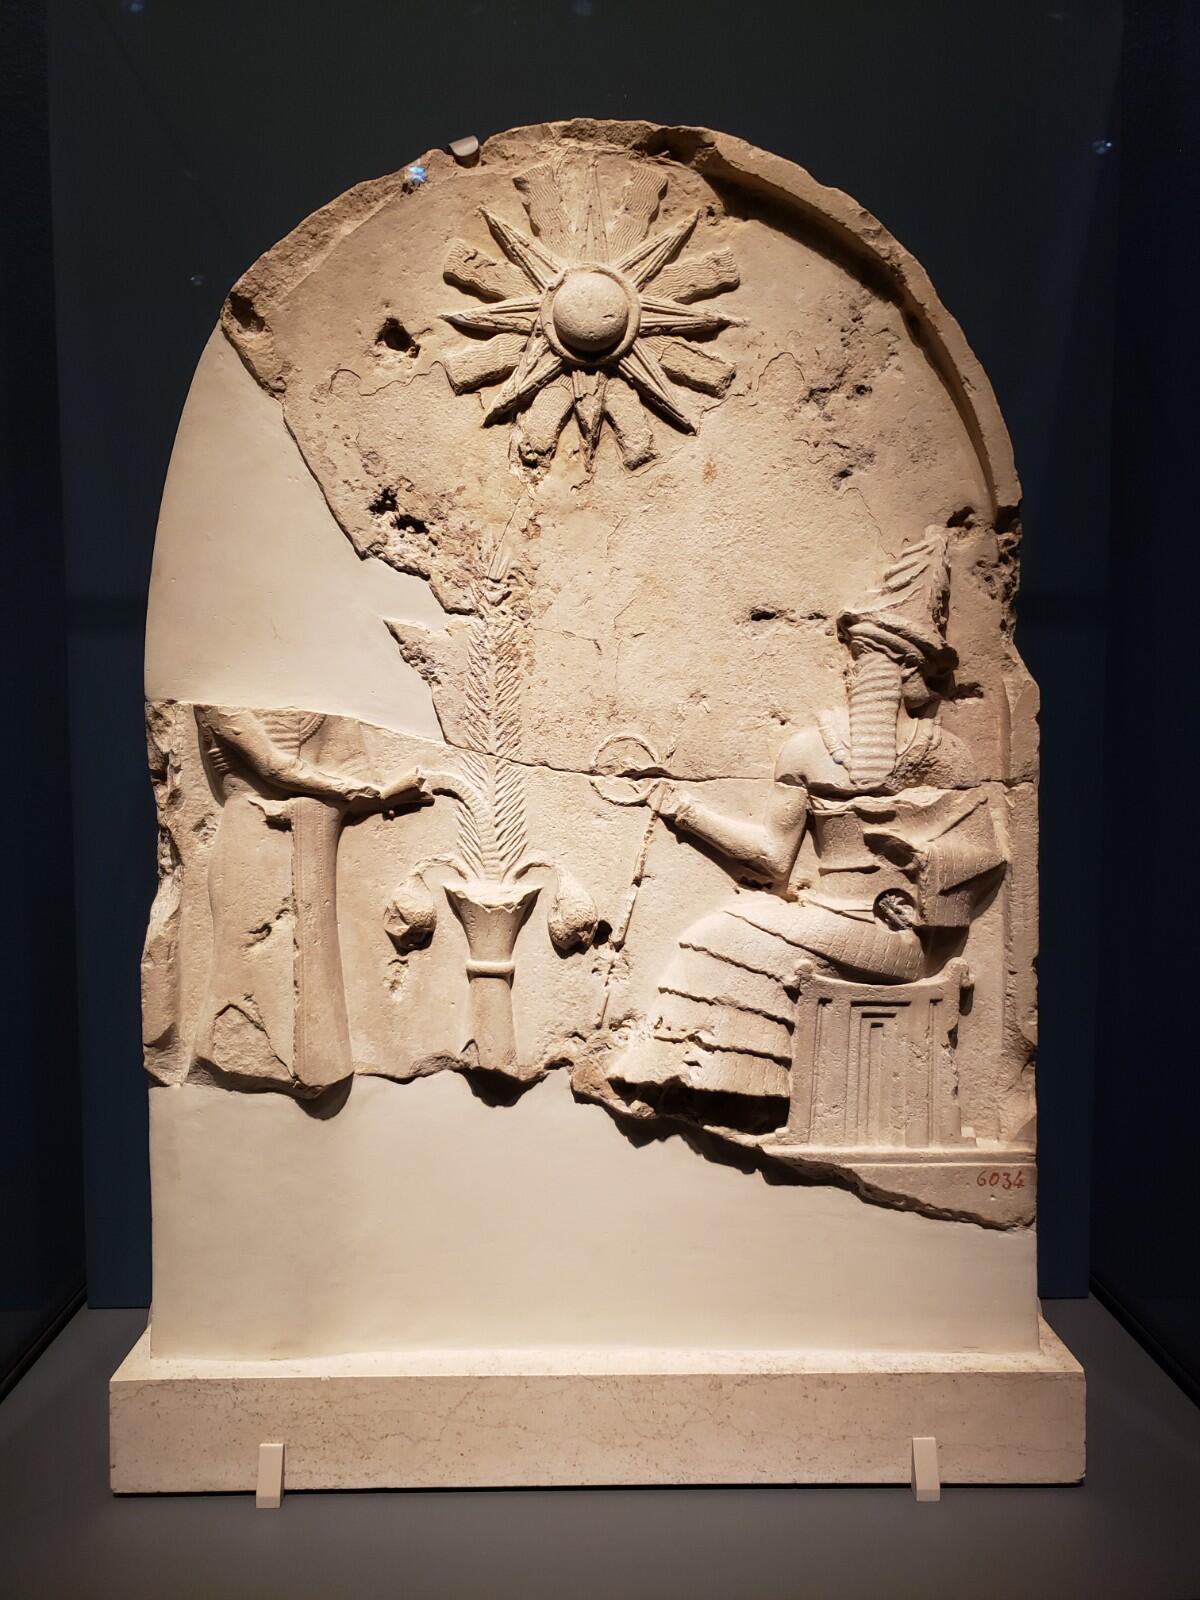 Fragments of limestone containing a bas-relief depiction of a god.